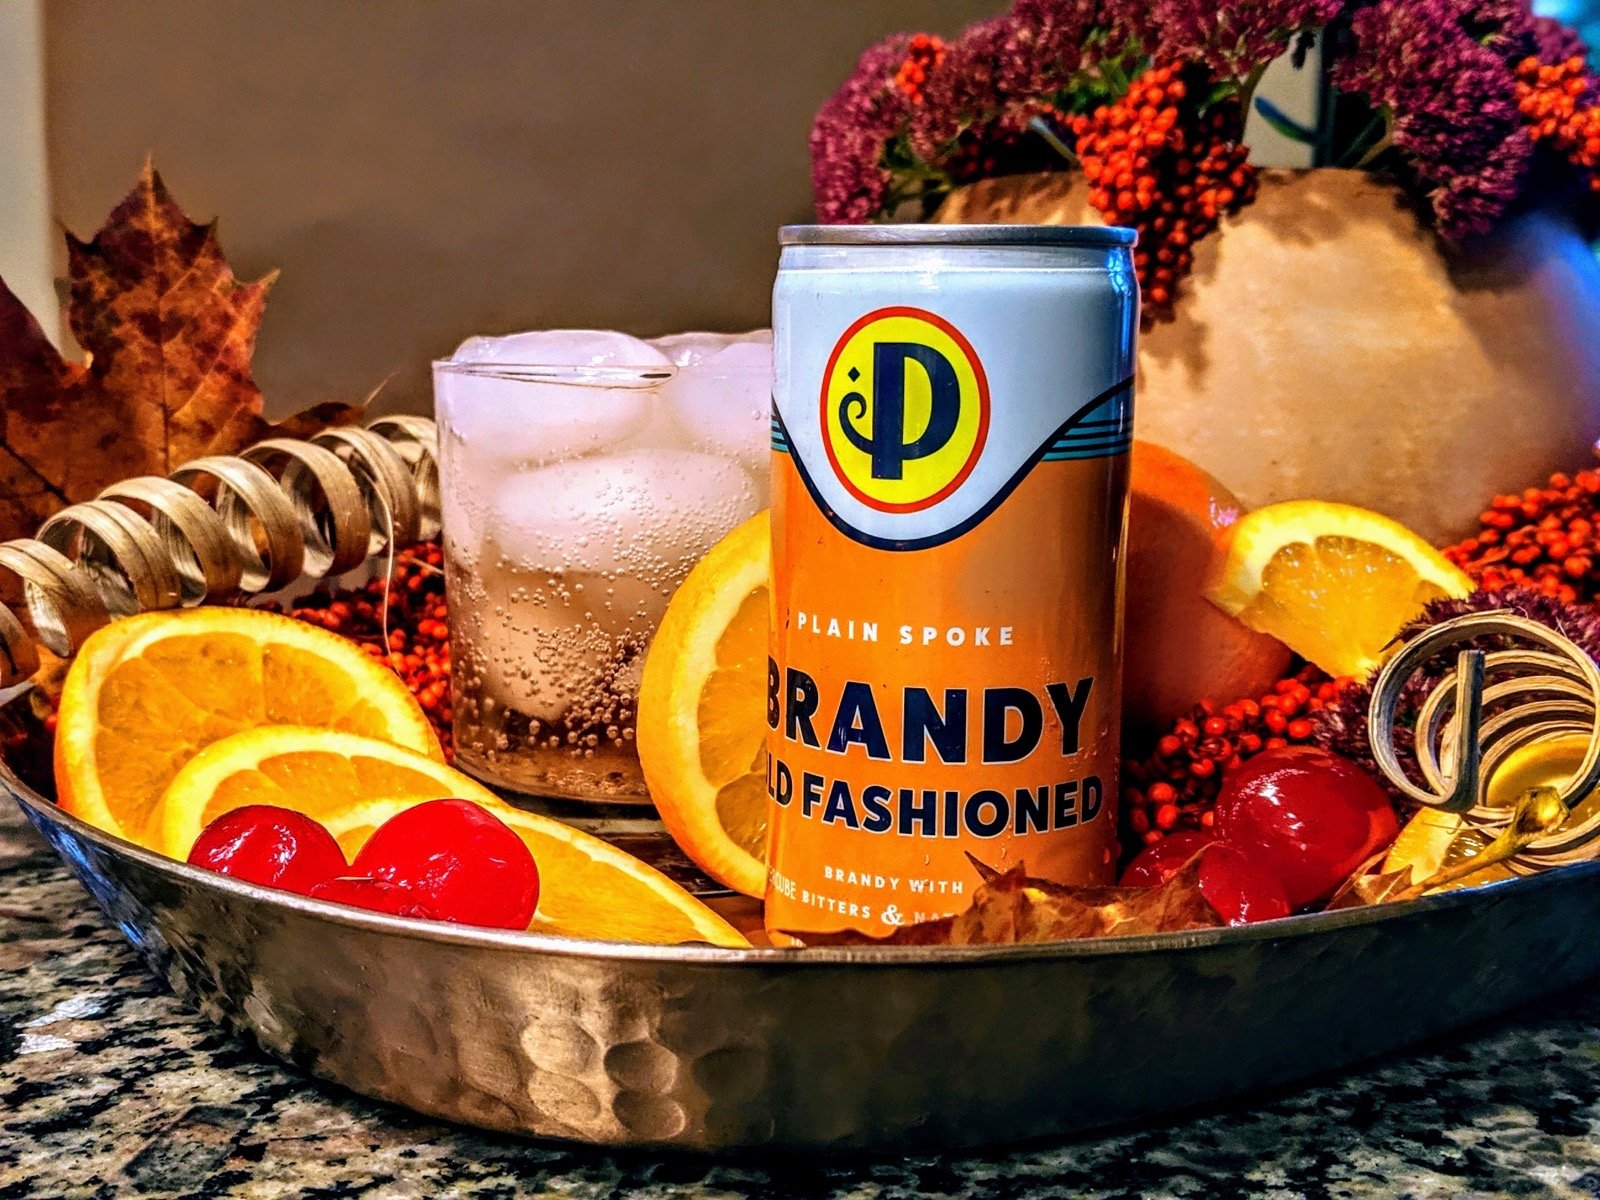 Plain Spoke Cocktail Co. releases first canned Brandy Old Fashioned cocktail